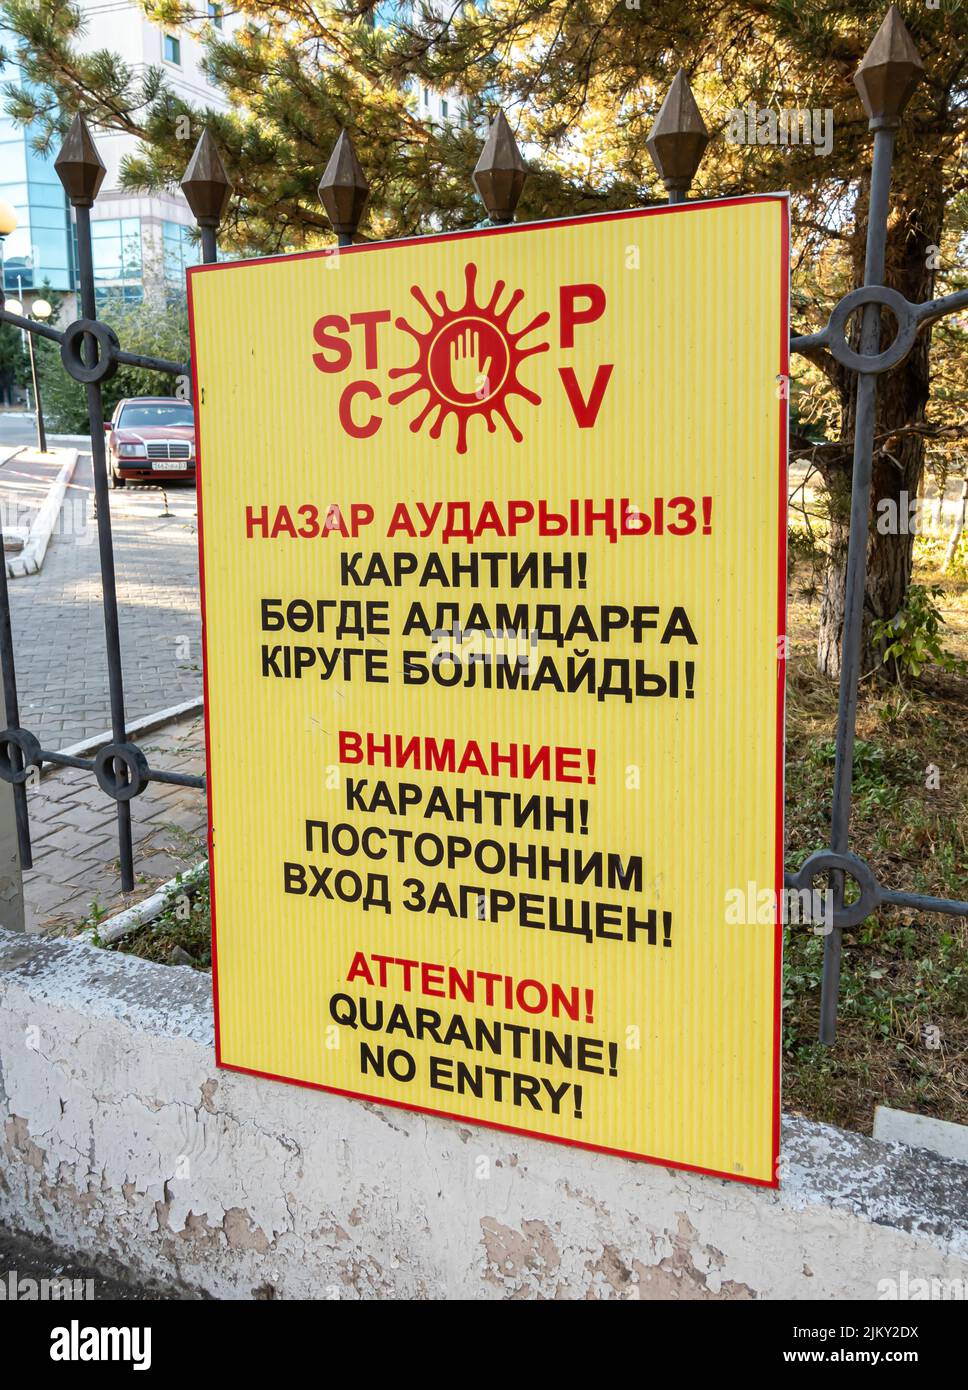 Attention, quarantine, no entry street sign and graphics in Nur-Sultan, Kazakhstan. Covid-19 prevention sign Stock Photo